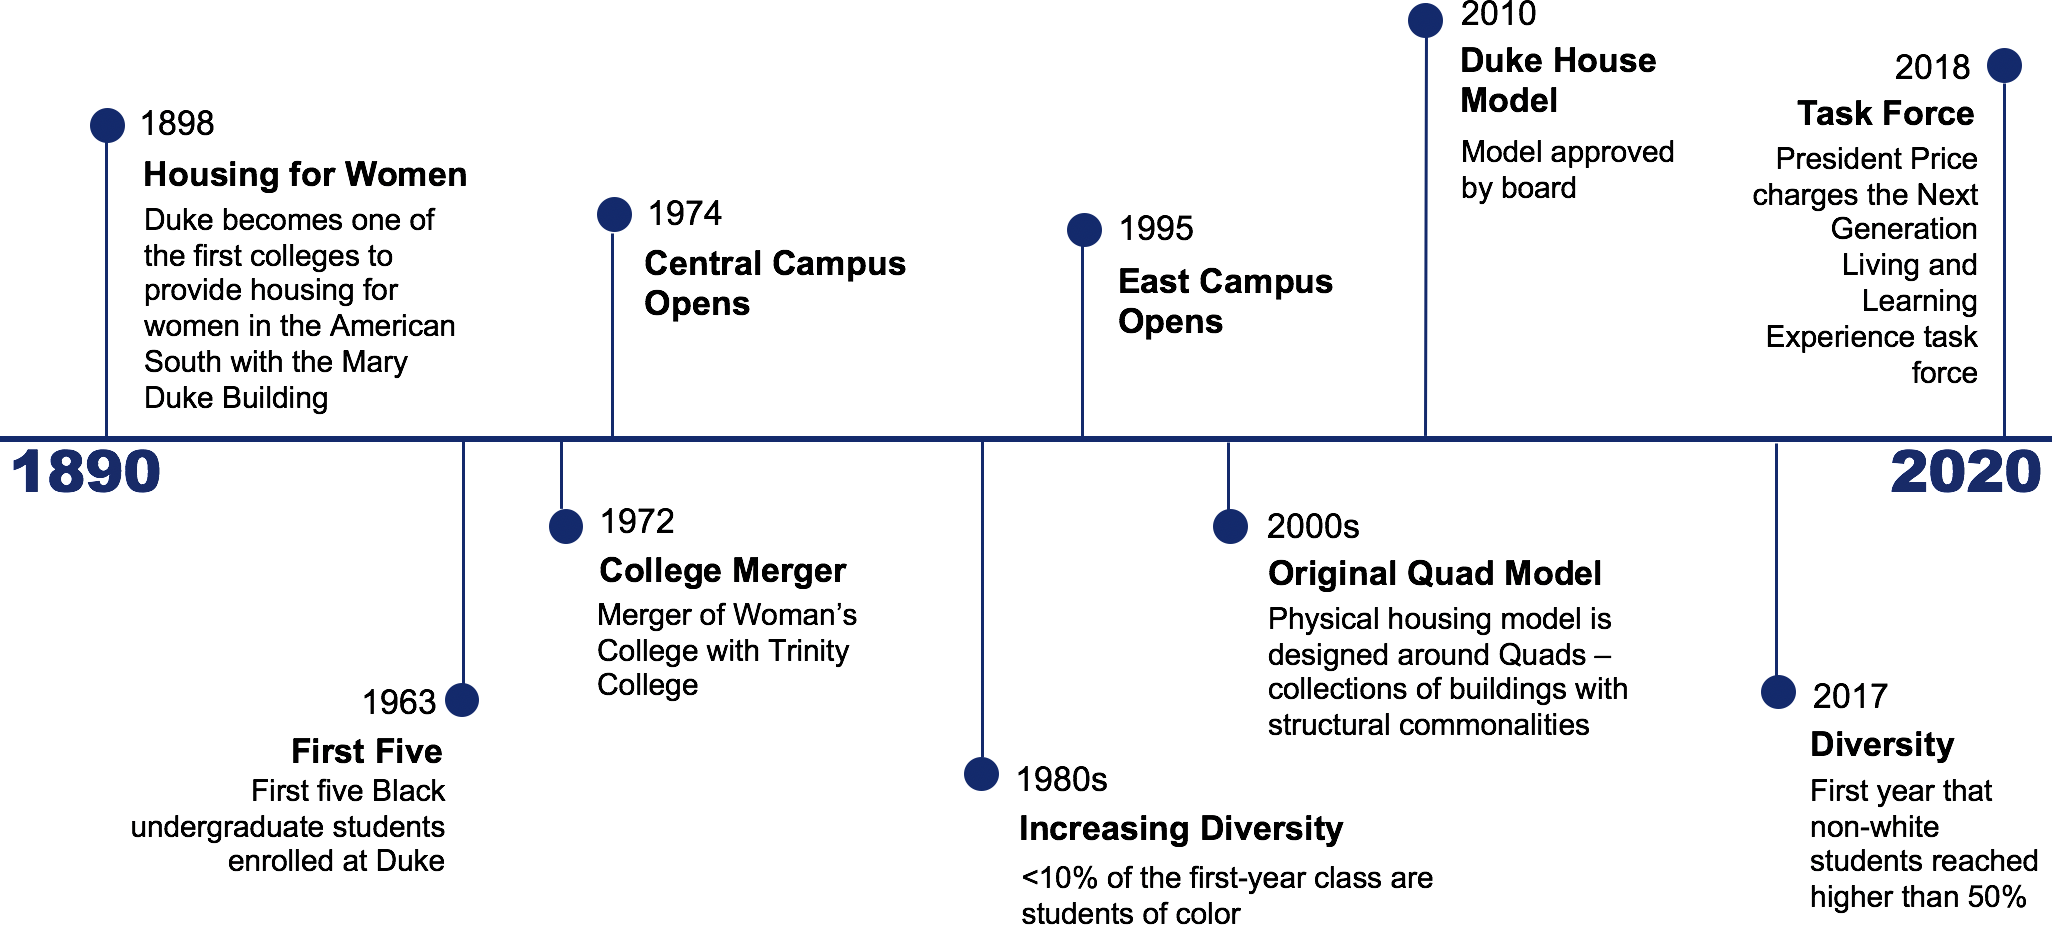 1898: Housing for Women, 1963: First five Black undergraduate students at Duke, 1974: Central Campus Opens, 1980s: Increasing Diversity, 1995: East Campus Opens, 2000s: Original Quad Model, 2010: Duke House Model, 2017: Diversity, 2018: Task Force